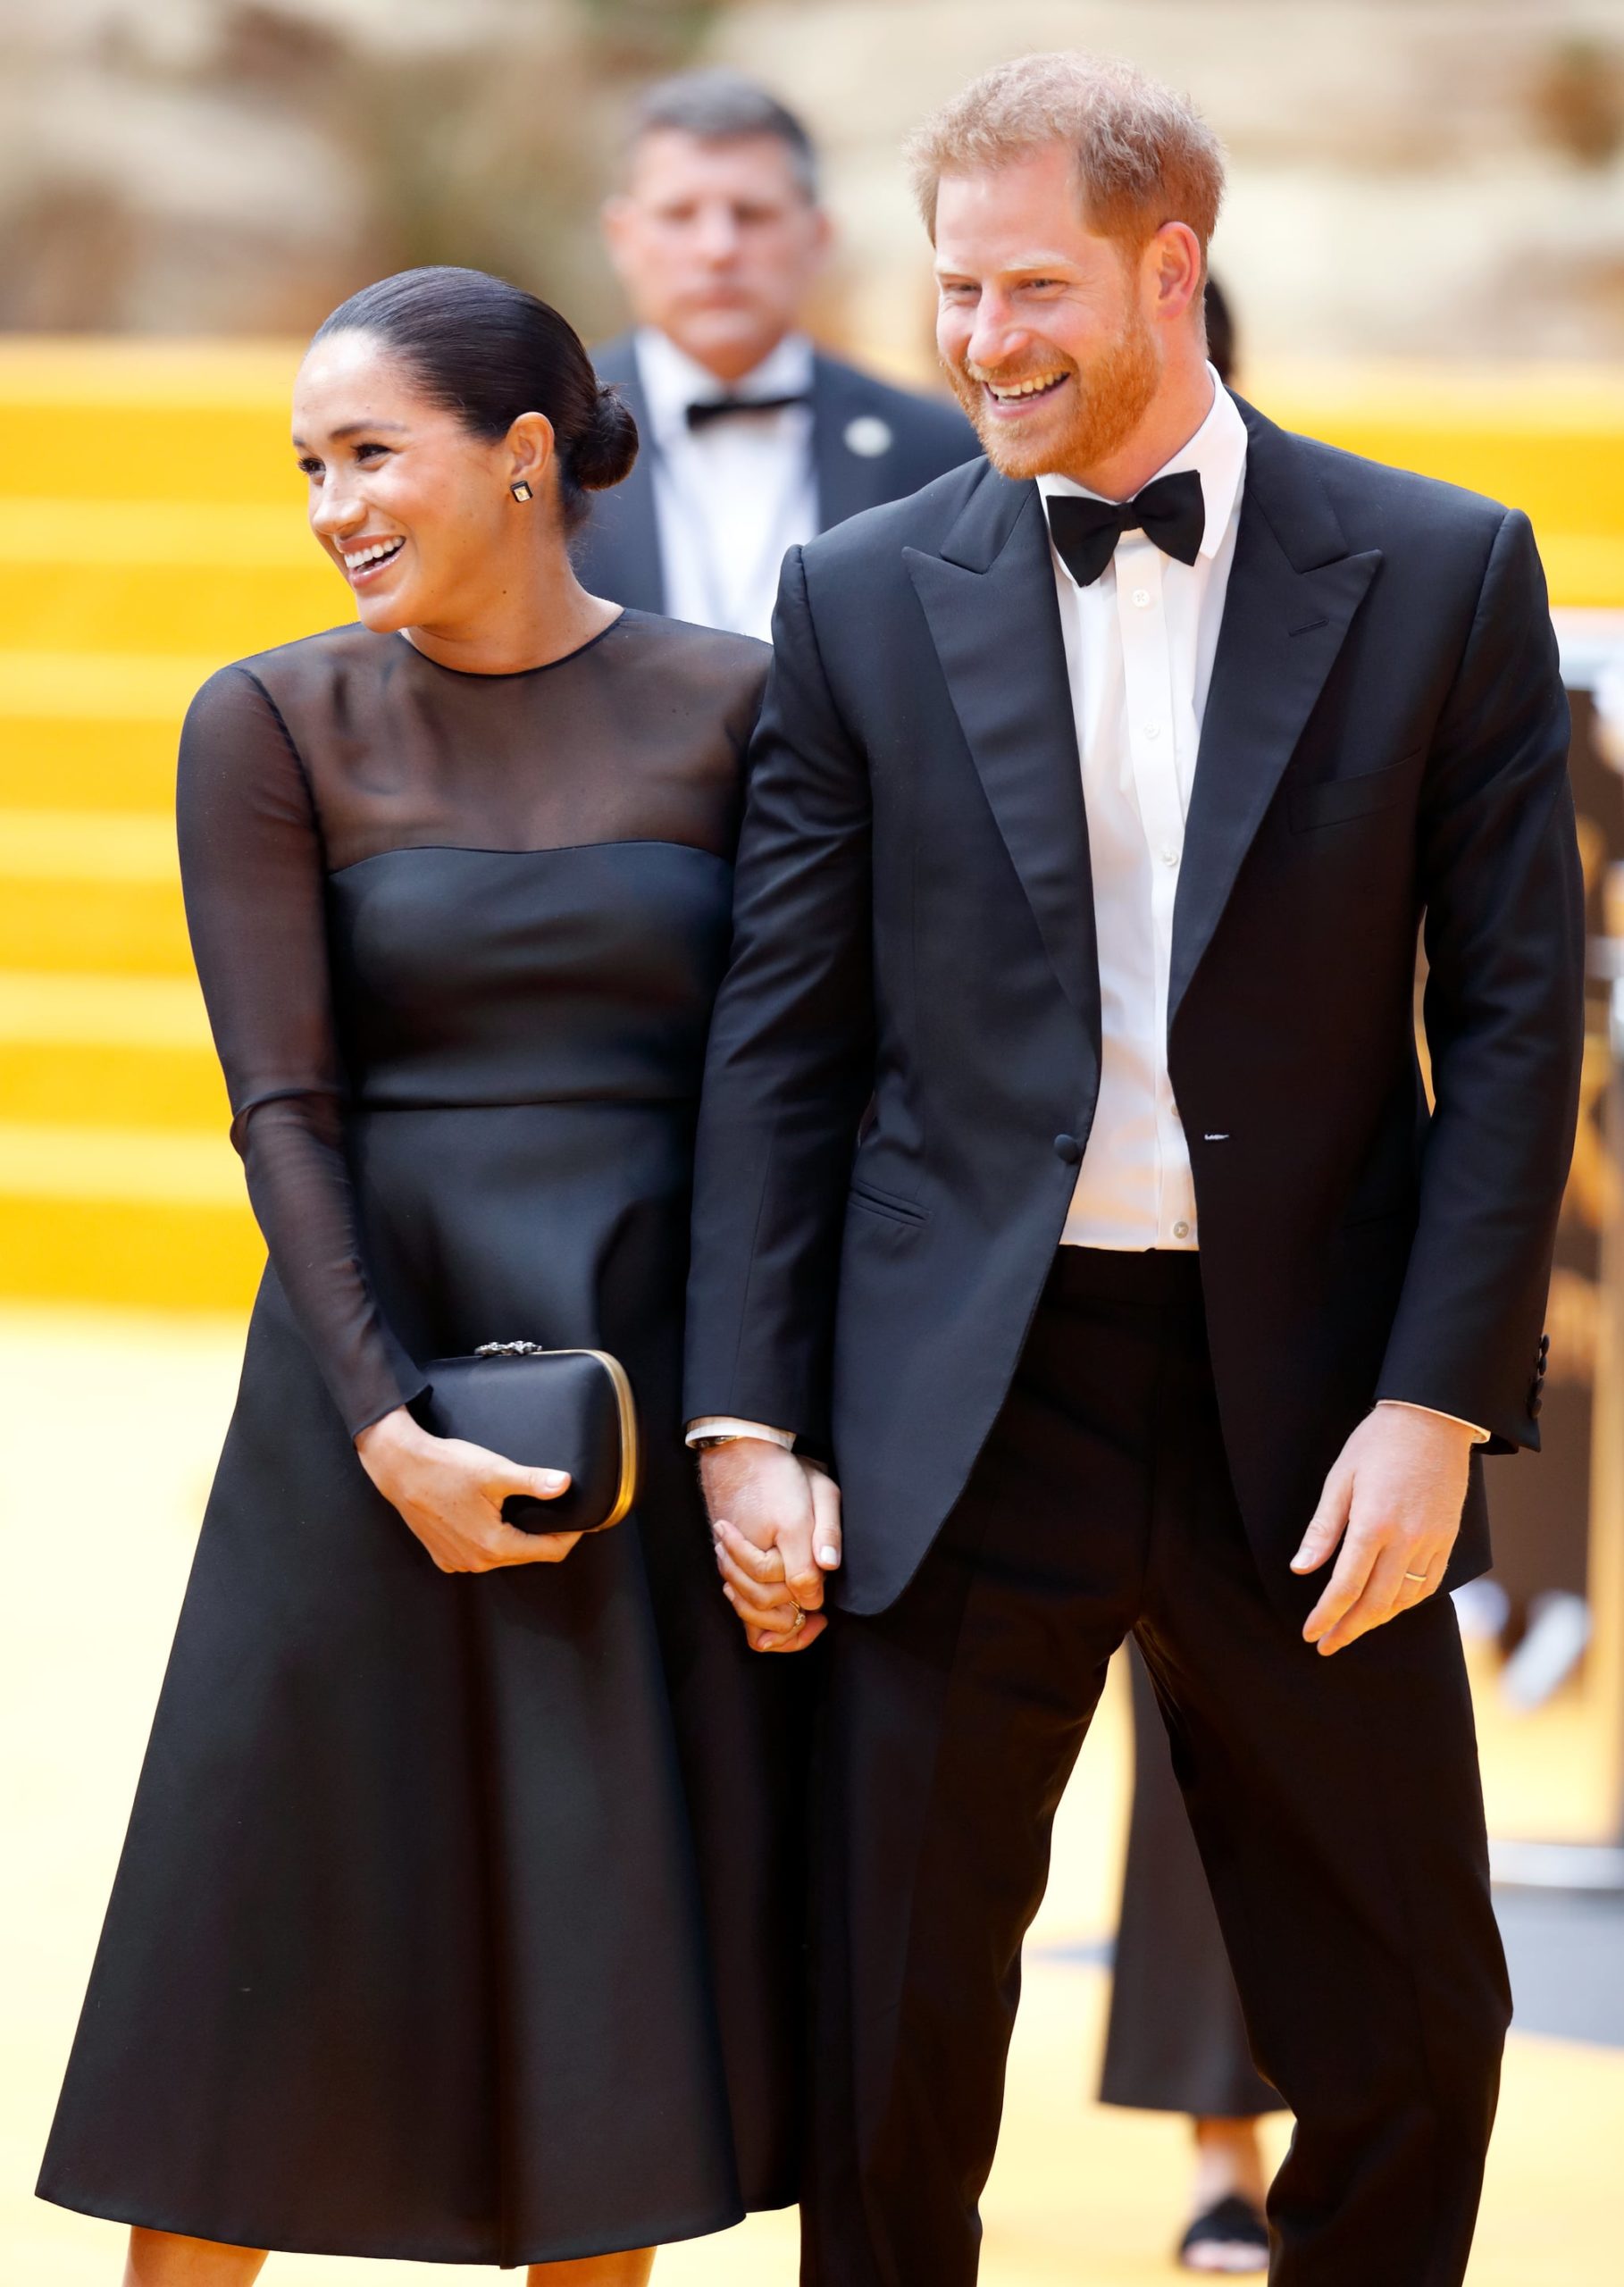 LONDON, UNITED KINGDOM - JULY 14: (EMBARGOED FOR PUBLICATION IN UK NEWSPAPERS UNTIL 24 HOURS AFTER CREATE DATE AND TIME) Meghan, Duchess of Sussex and Prince Harry, Duke of Sussex attend